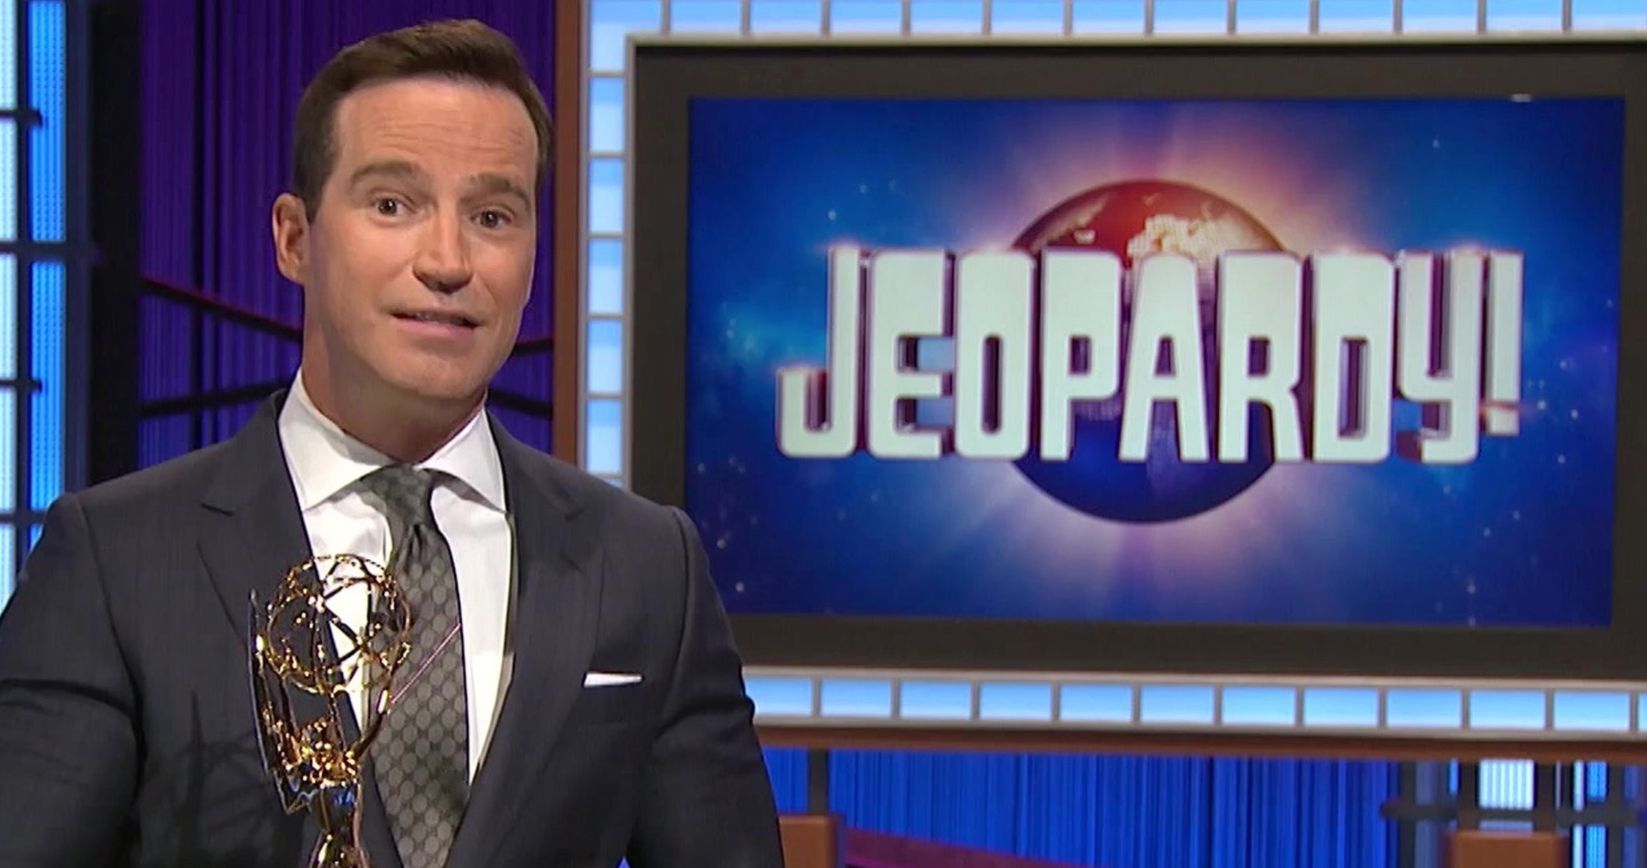 Jeopardy! Producer Mike Richards in 'Advanced Negotiations' to Be Permanent Host